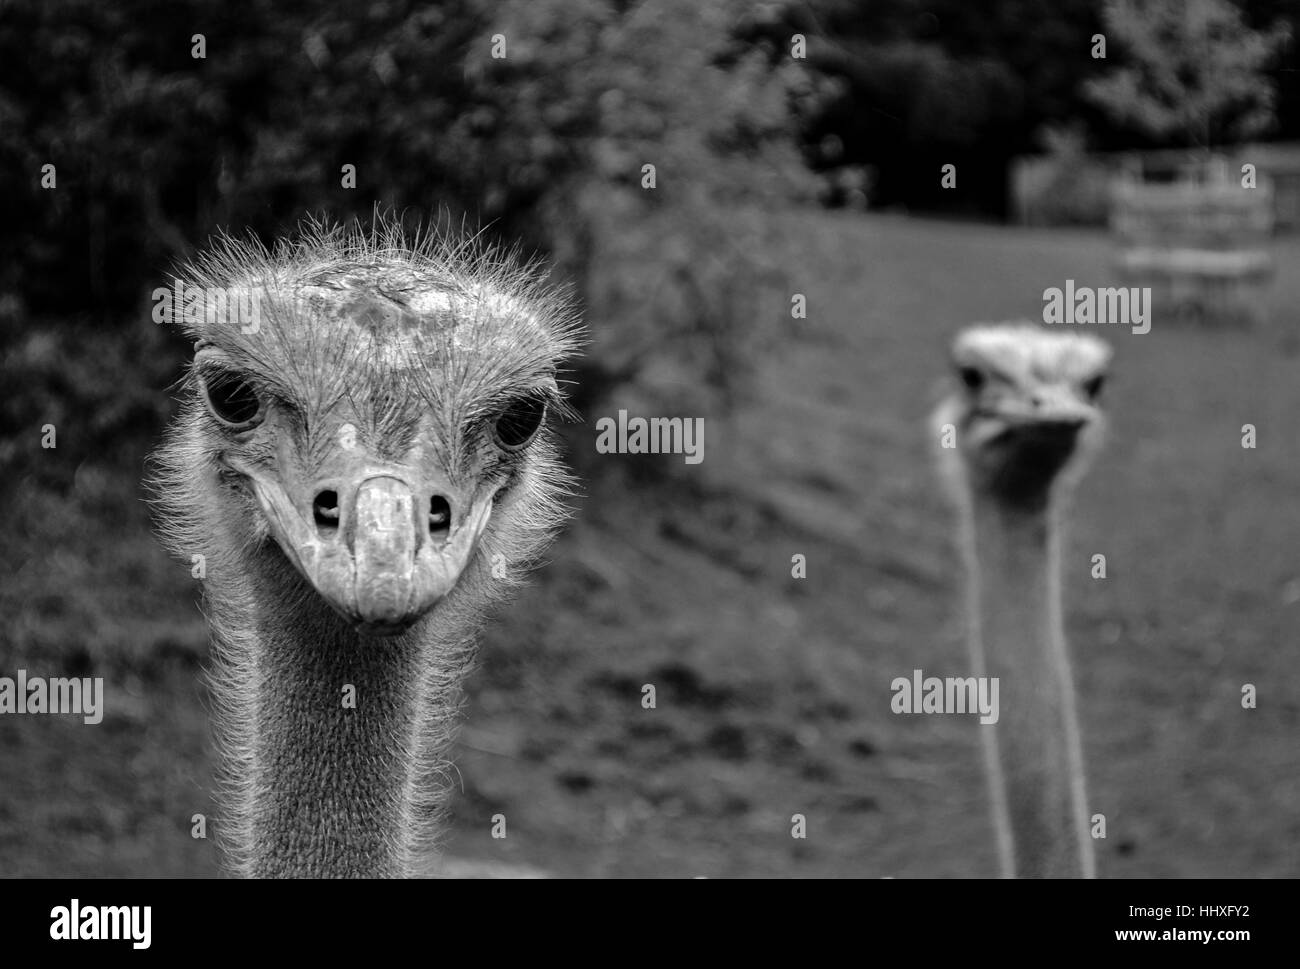 black and white photo of two ostriches looking towards the camera taken at paignton zoo Stock Photo